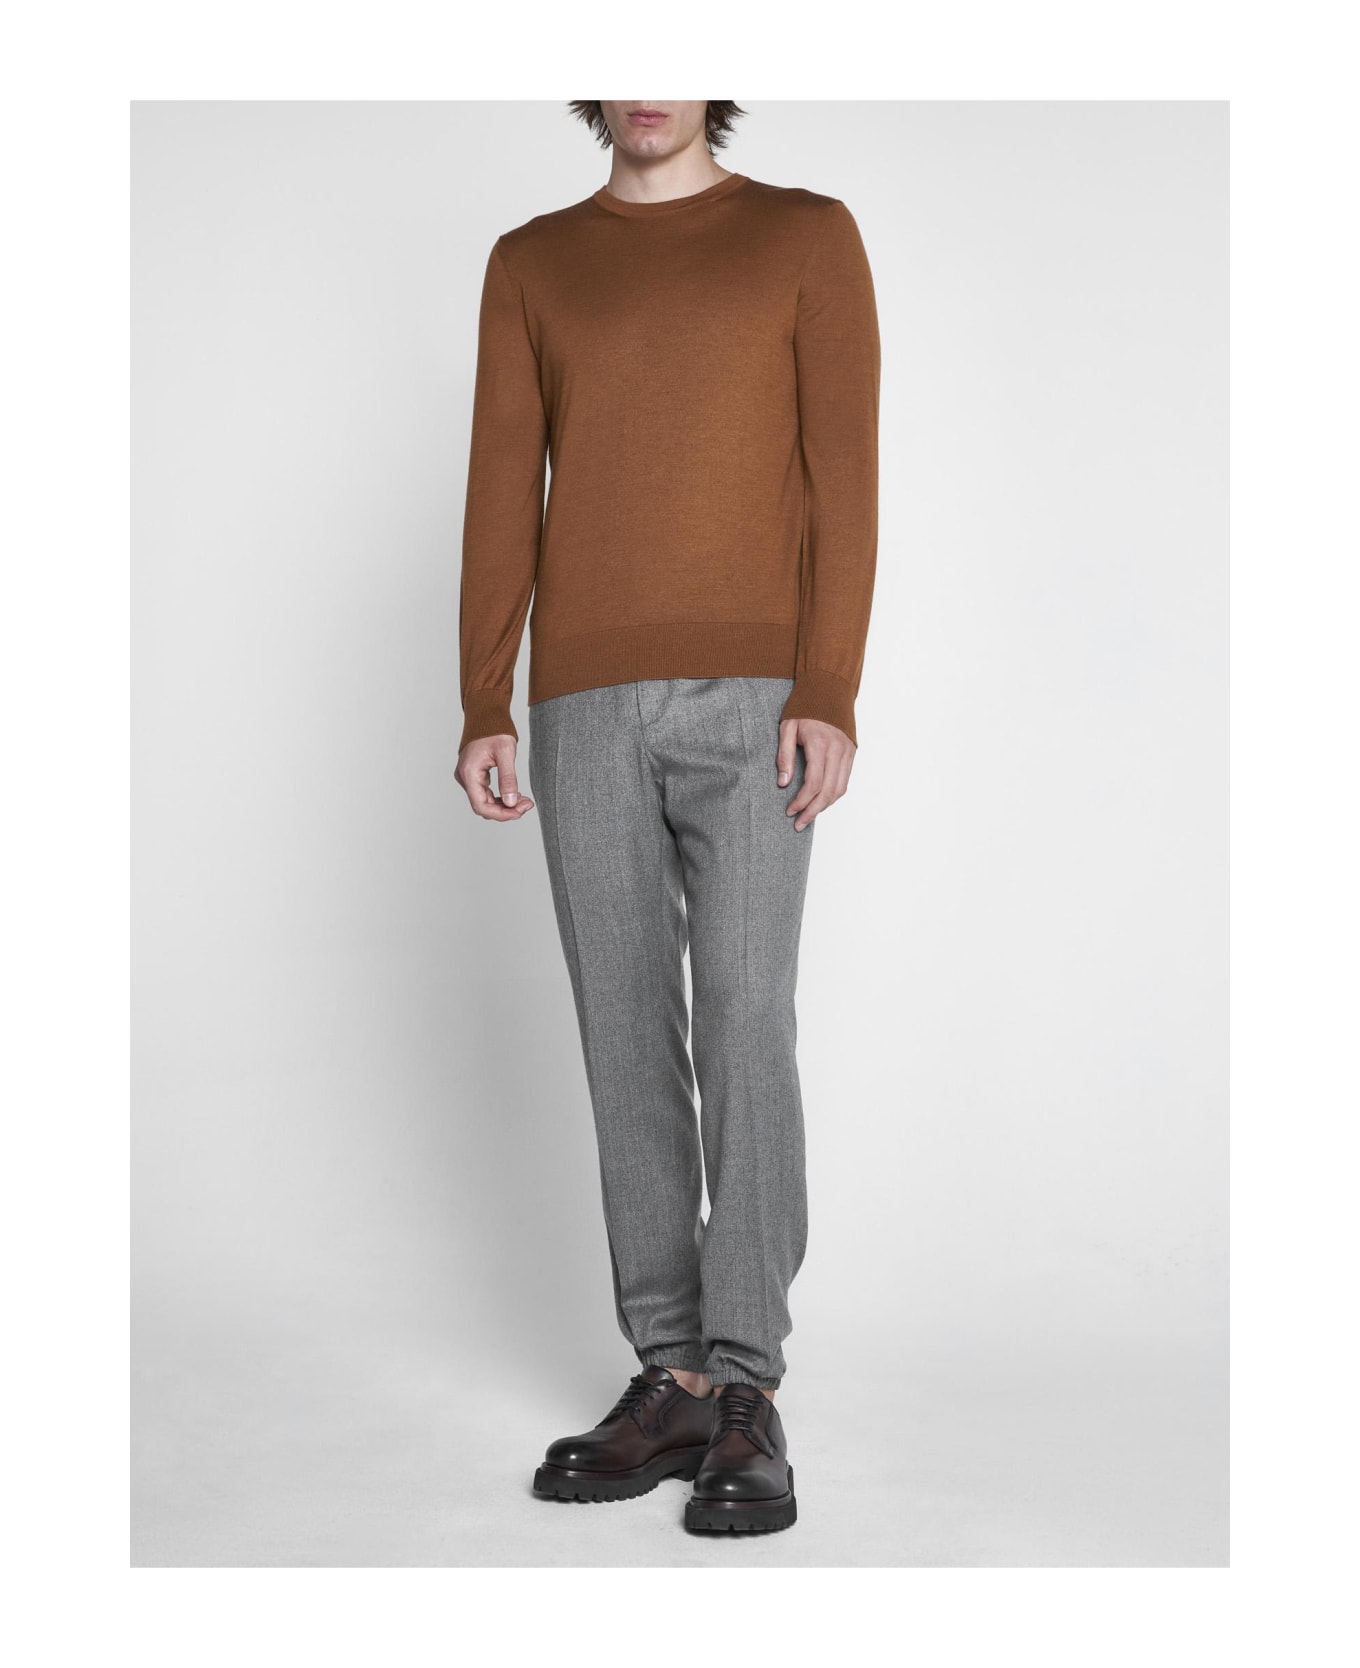 Zegna Cashmere And Silk Sweater - BROWN